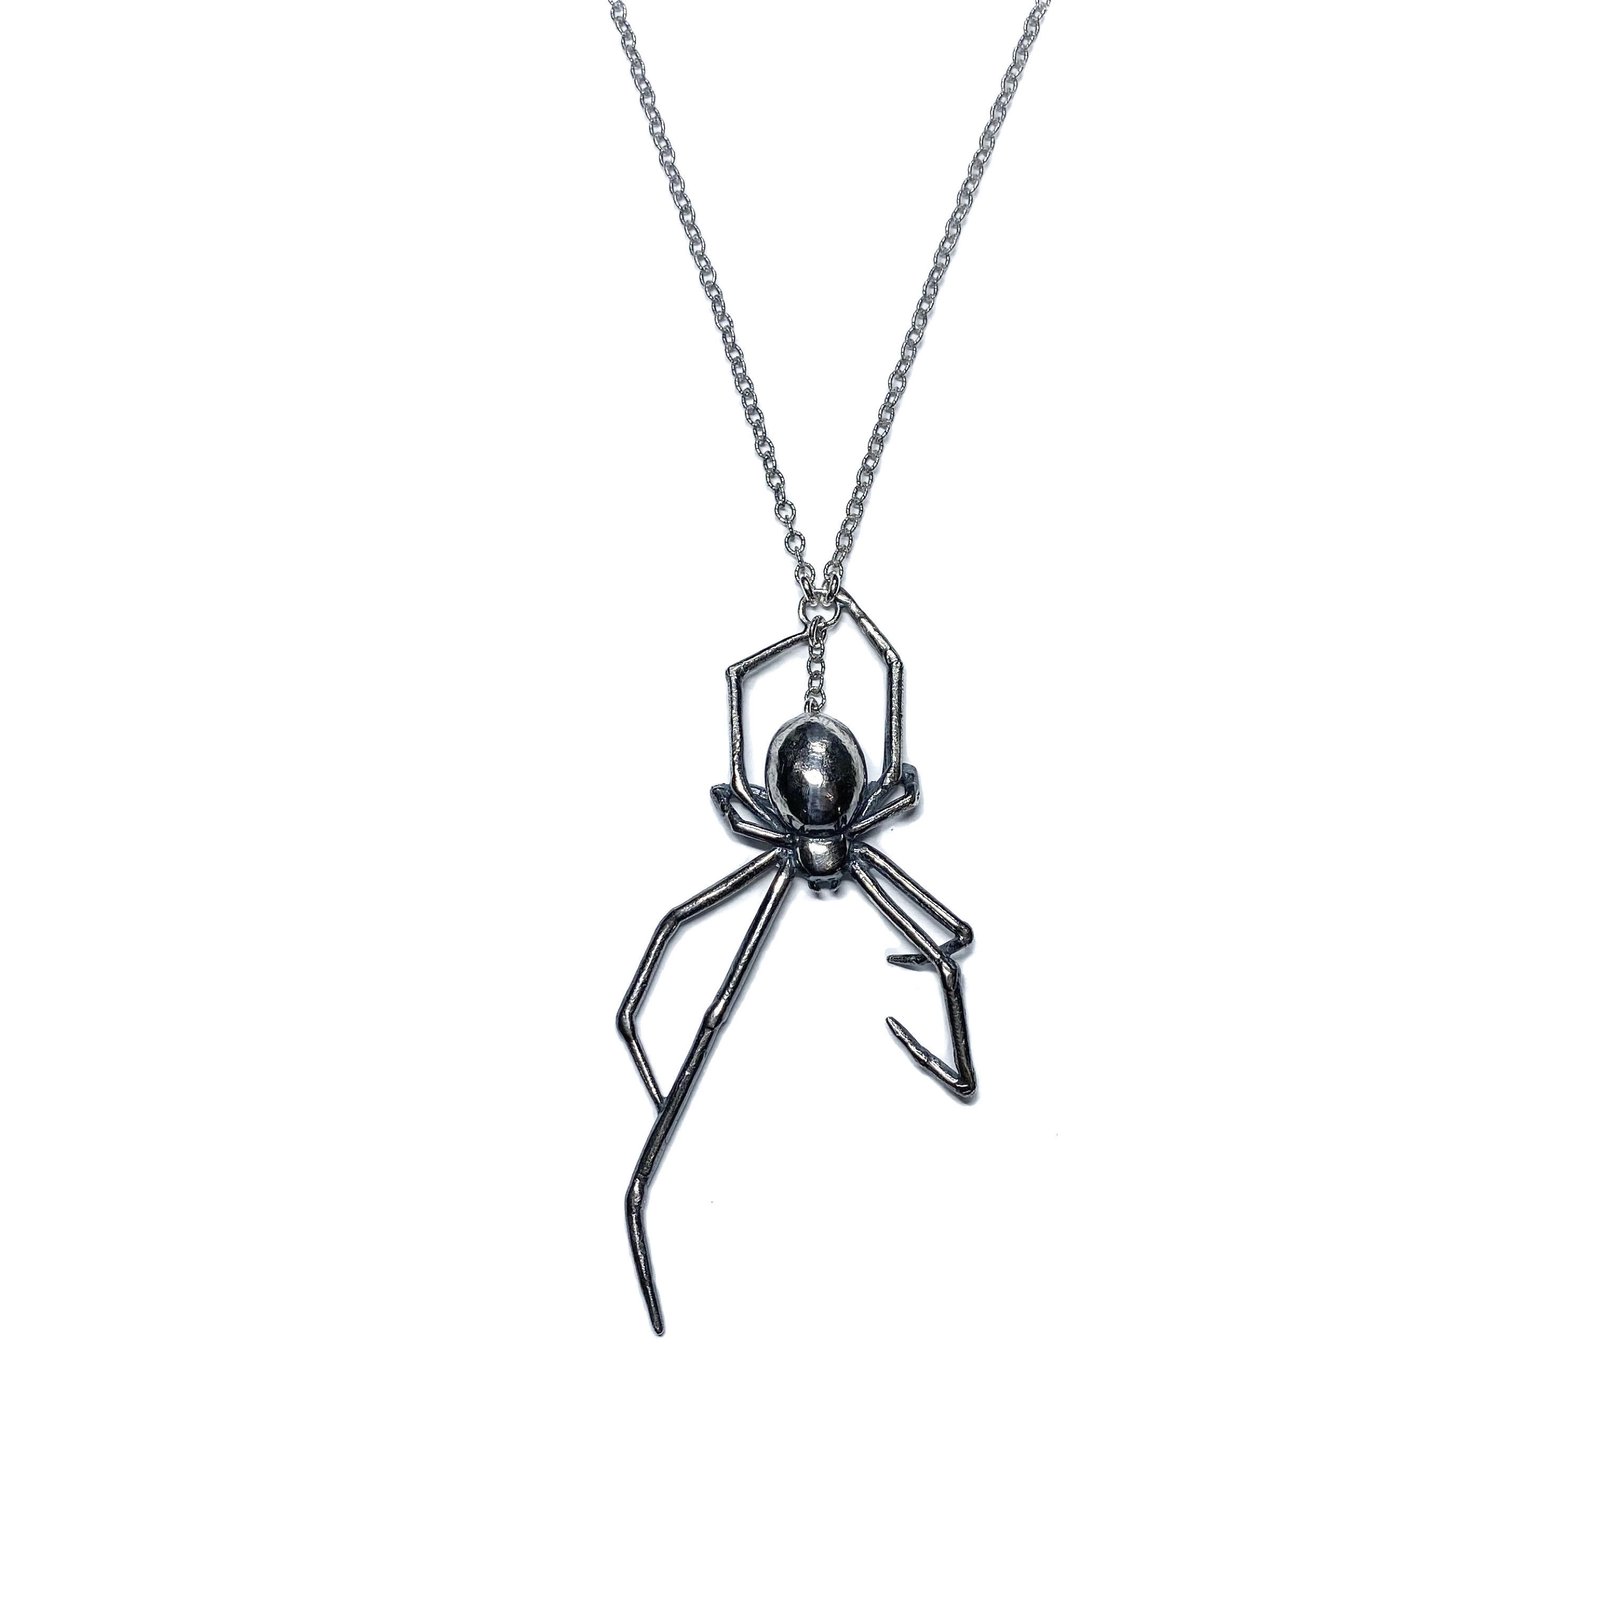 Betsey Johnson blue spider necklace | Betsey johnson, Spider necklace,  Betsey